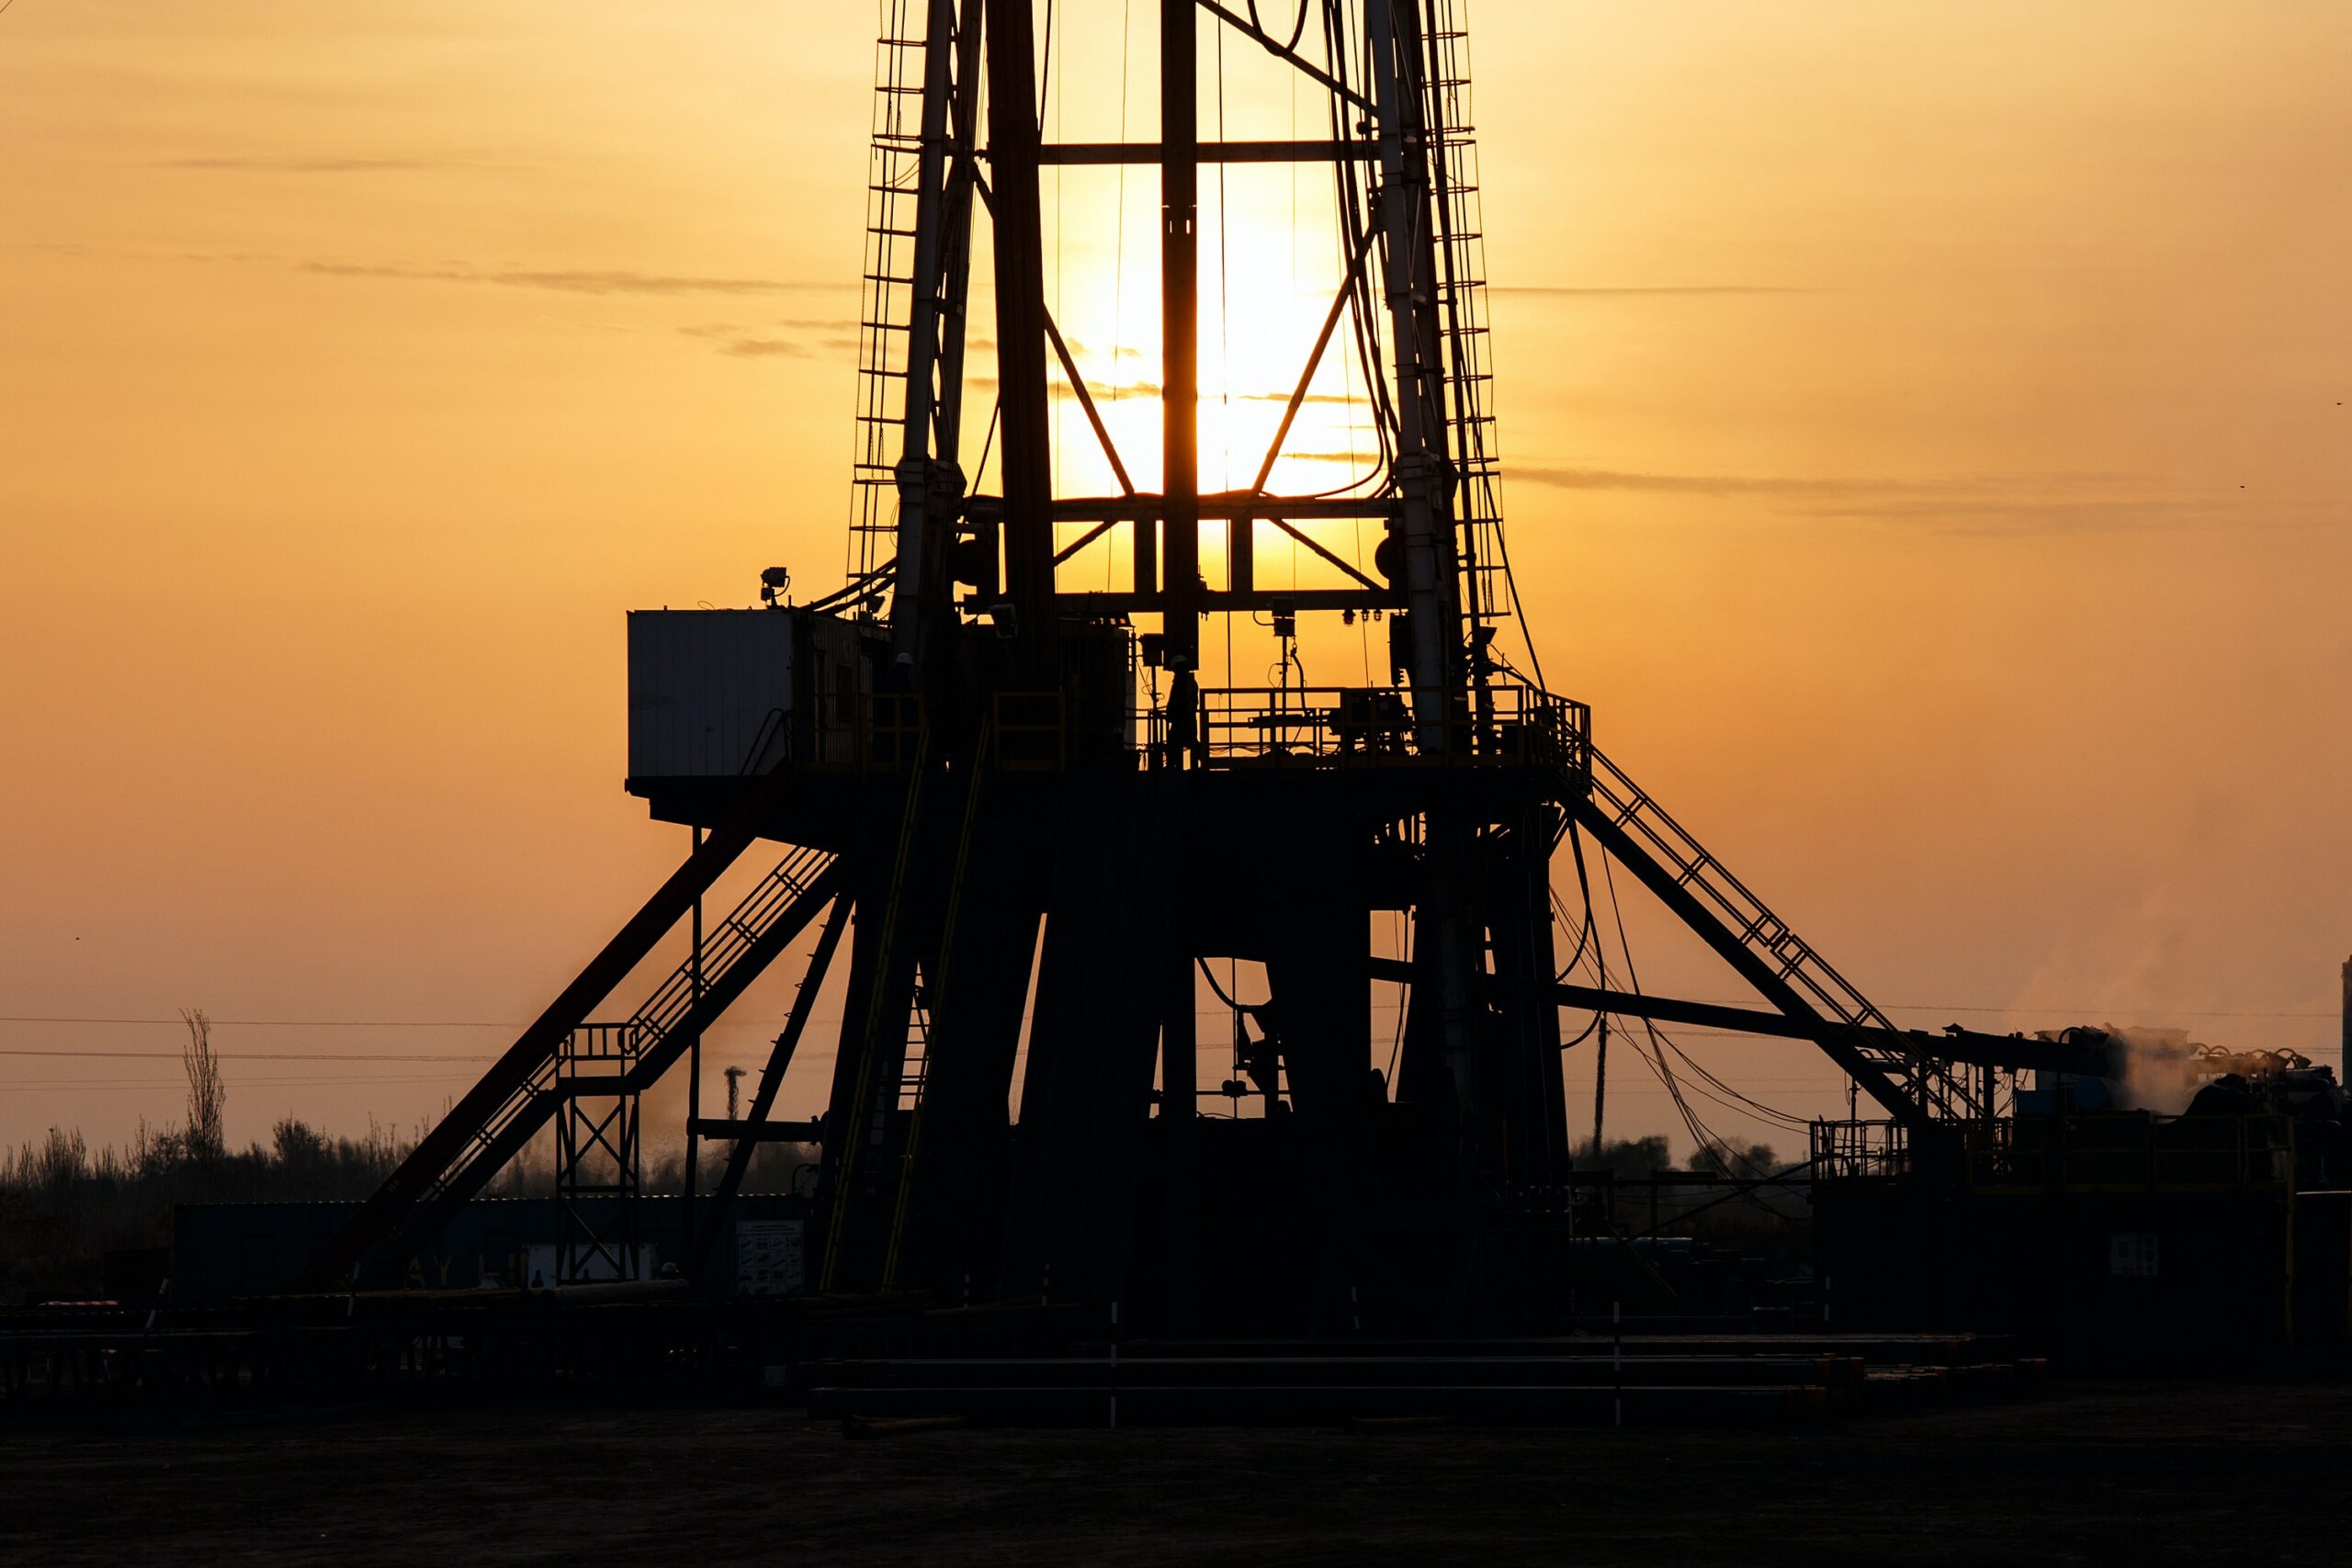 Land Your Dream Job in Oil & Gas: Insider Tips & Resources